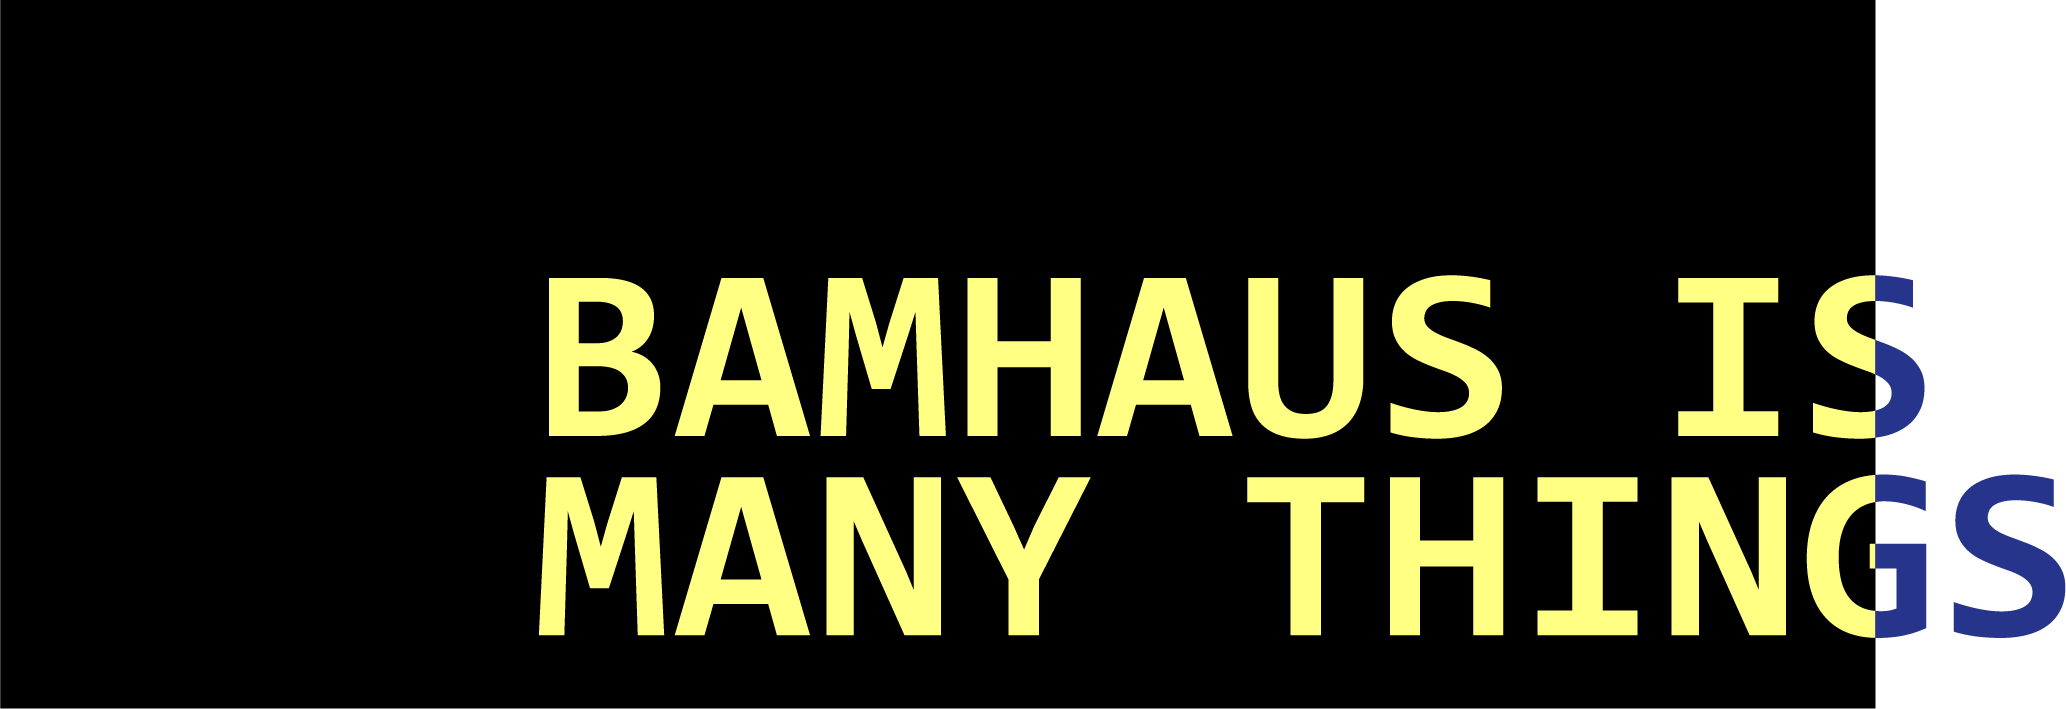 bamhaus is many things